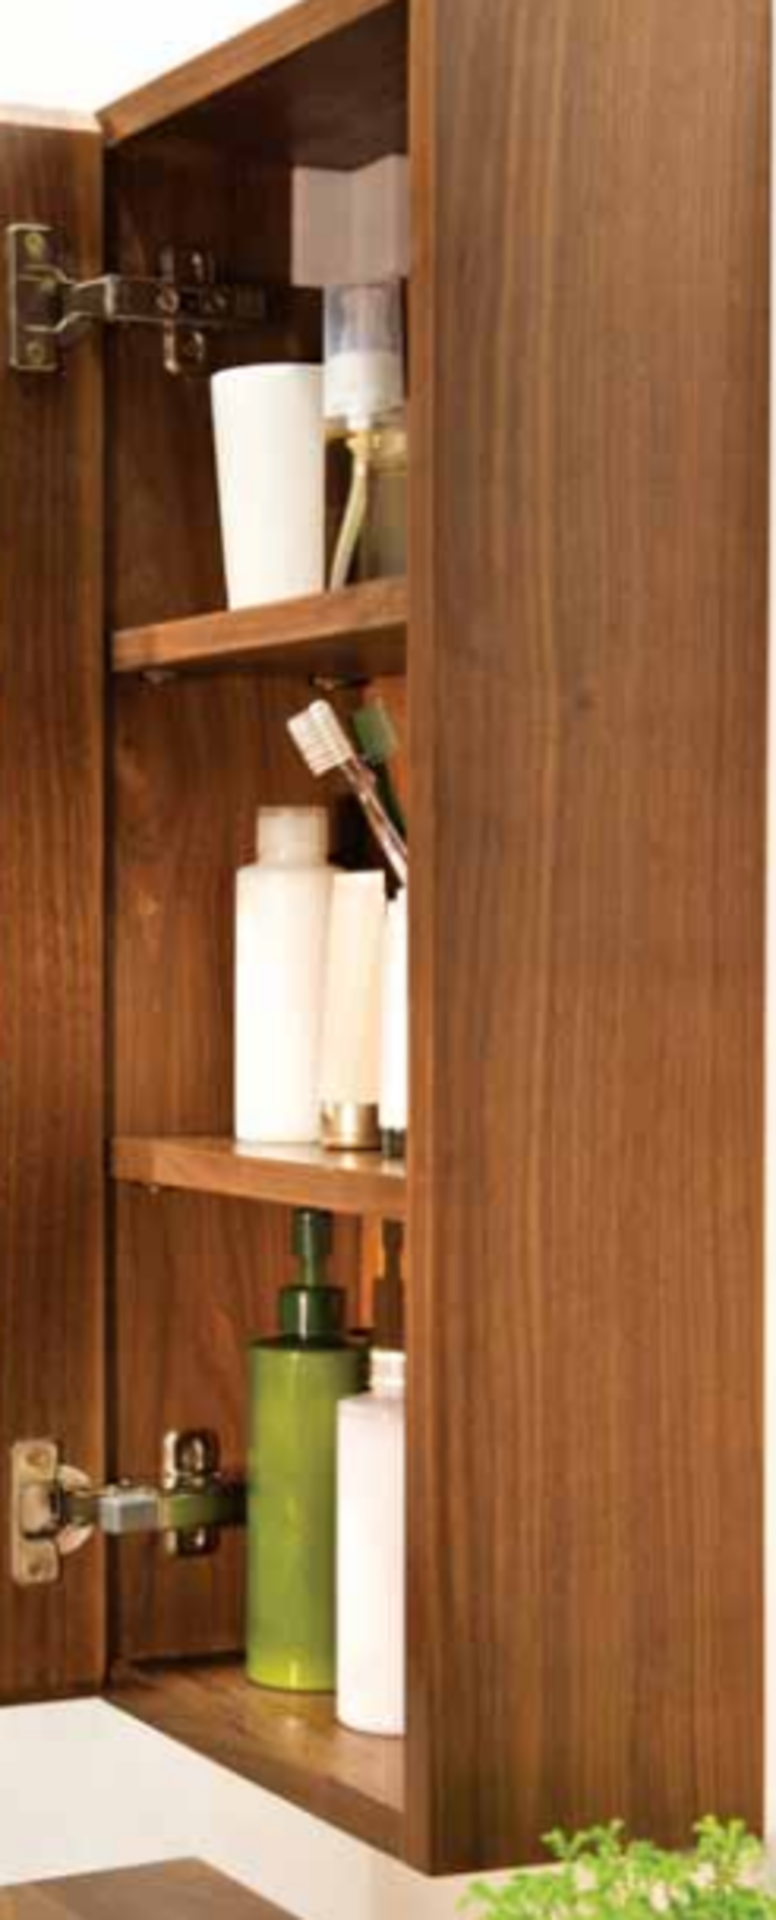 1 x Stonearth 300mm Wall Mounted Bathroom Storage Cabinet - American Solid Walnut - RRP £300 - Image 5 of 12